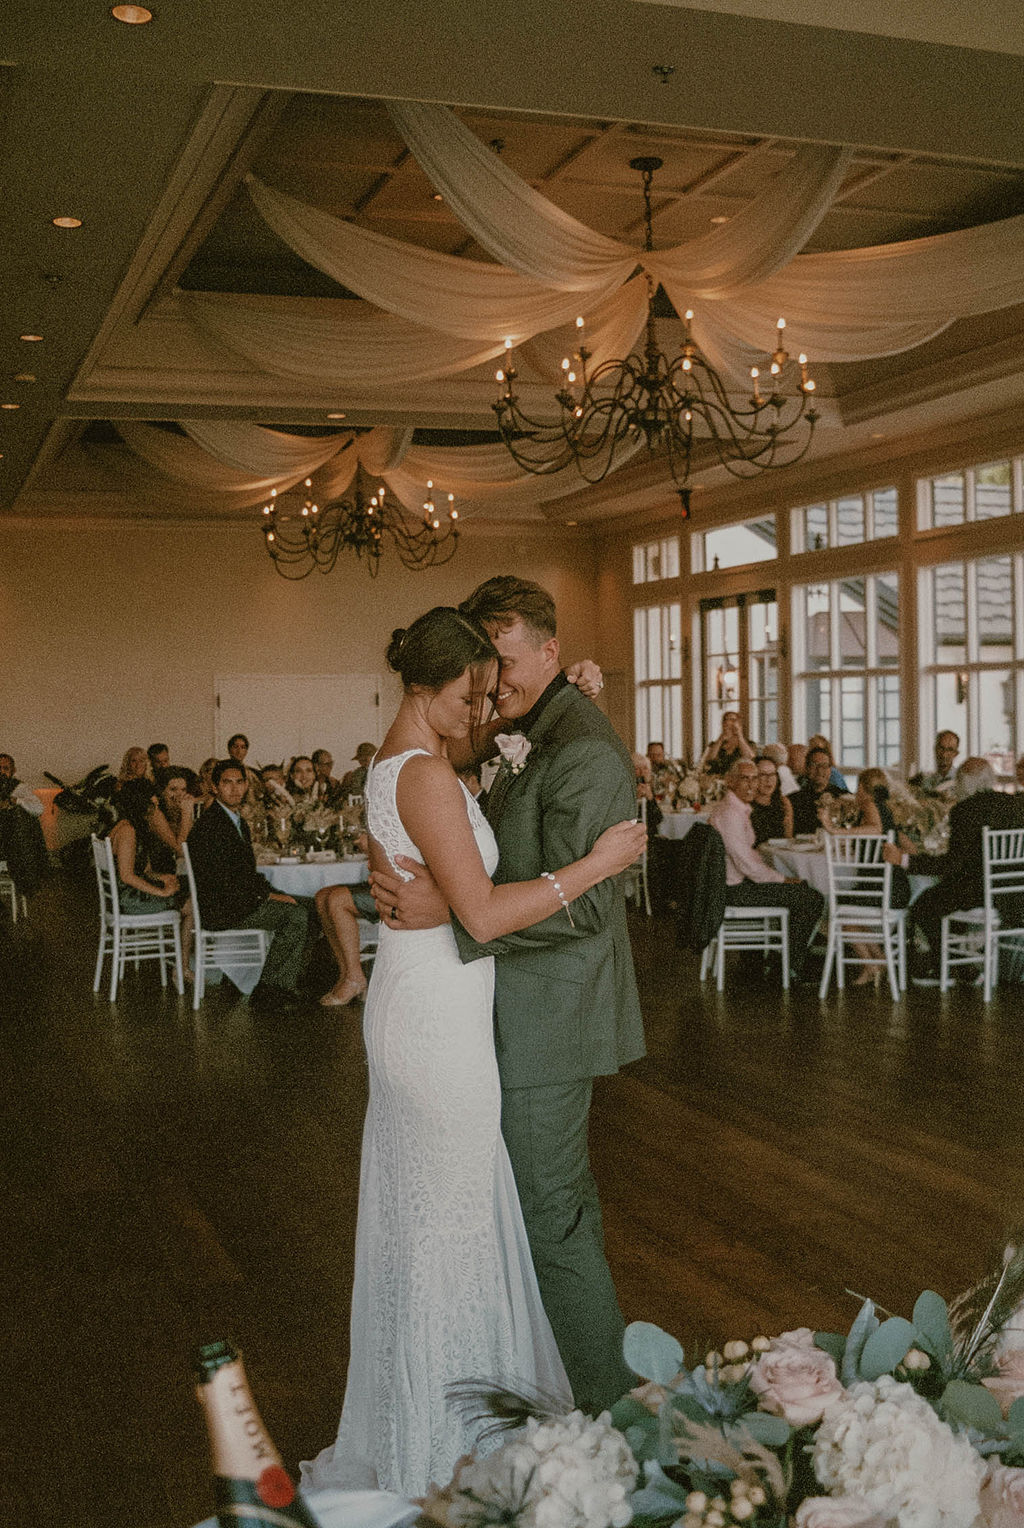 the couple dancing to their first dance